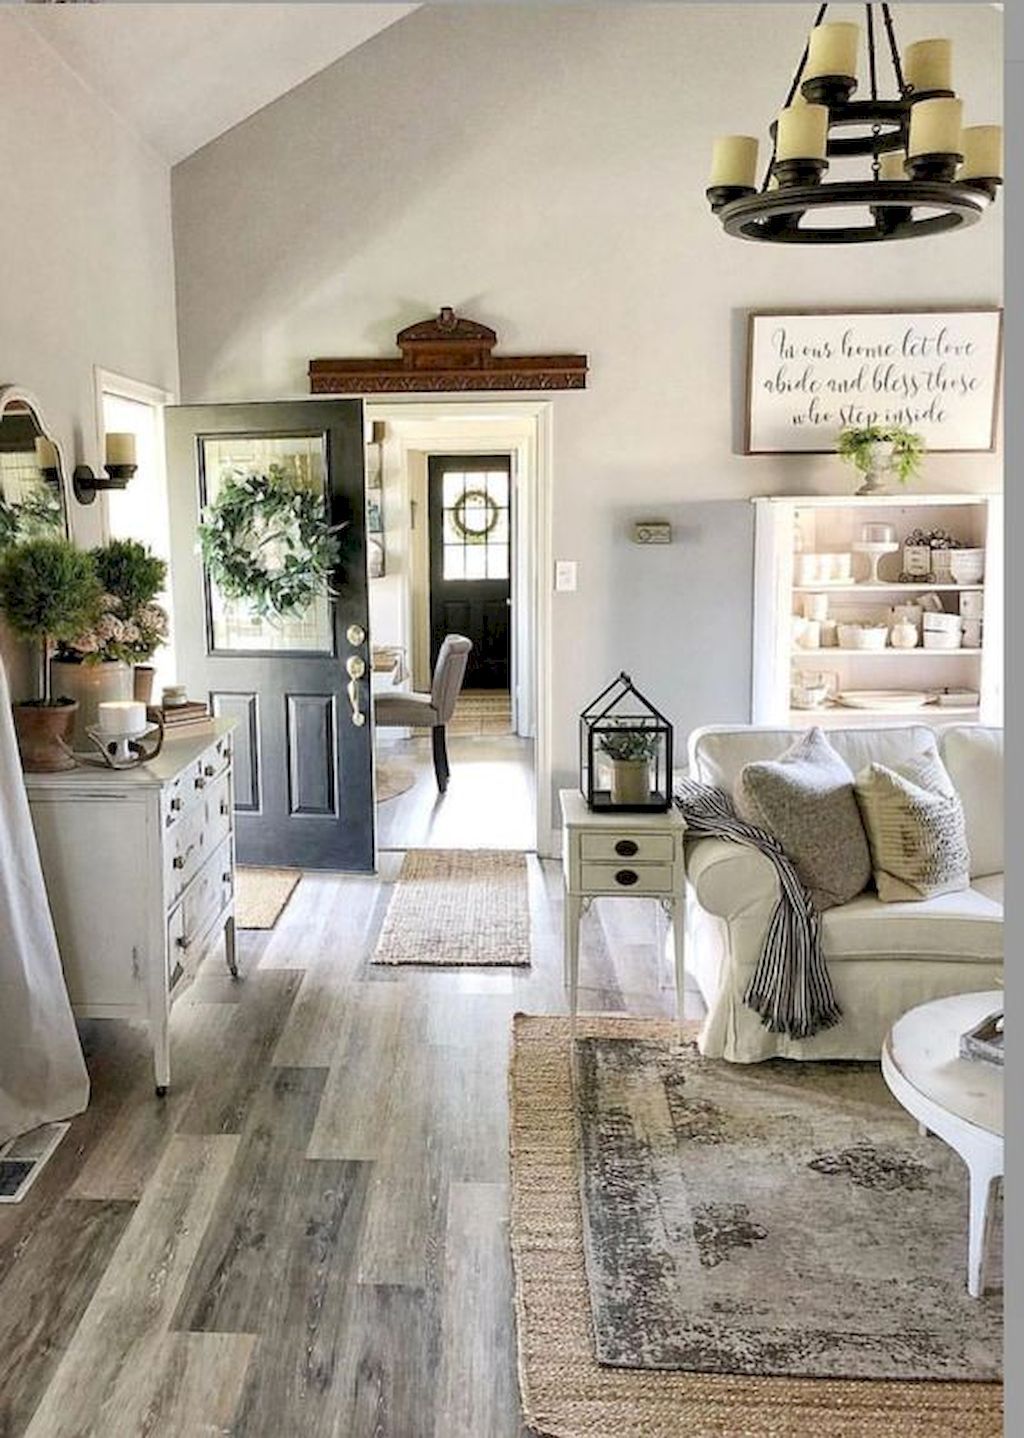 Pinterest Living Room Colors 2020 : 2020 has seen an entirely new range ...